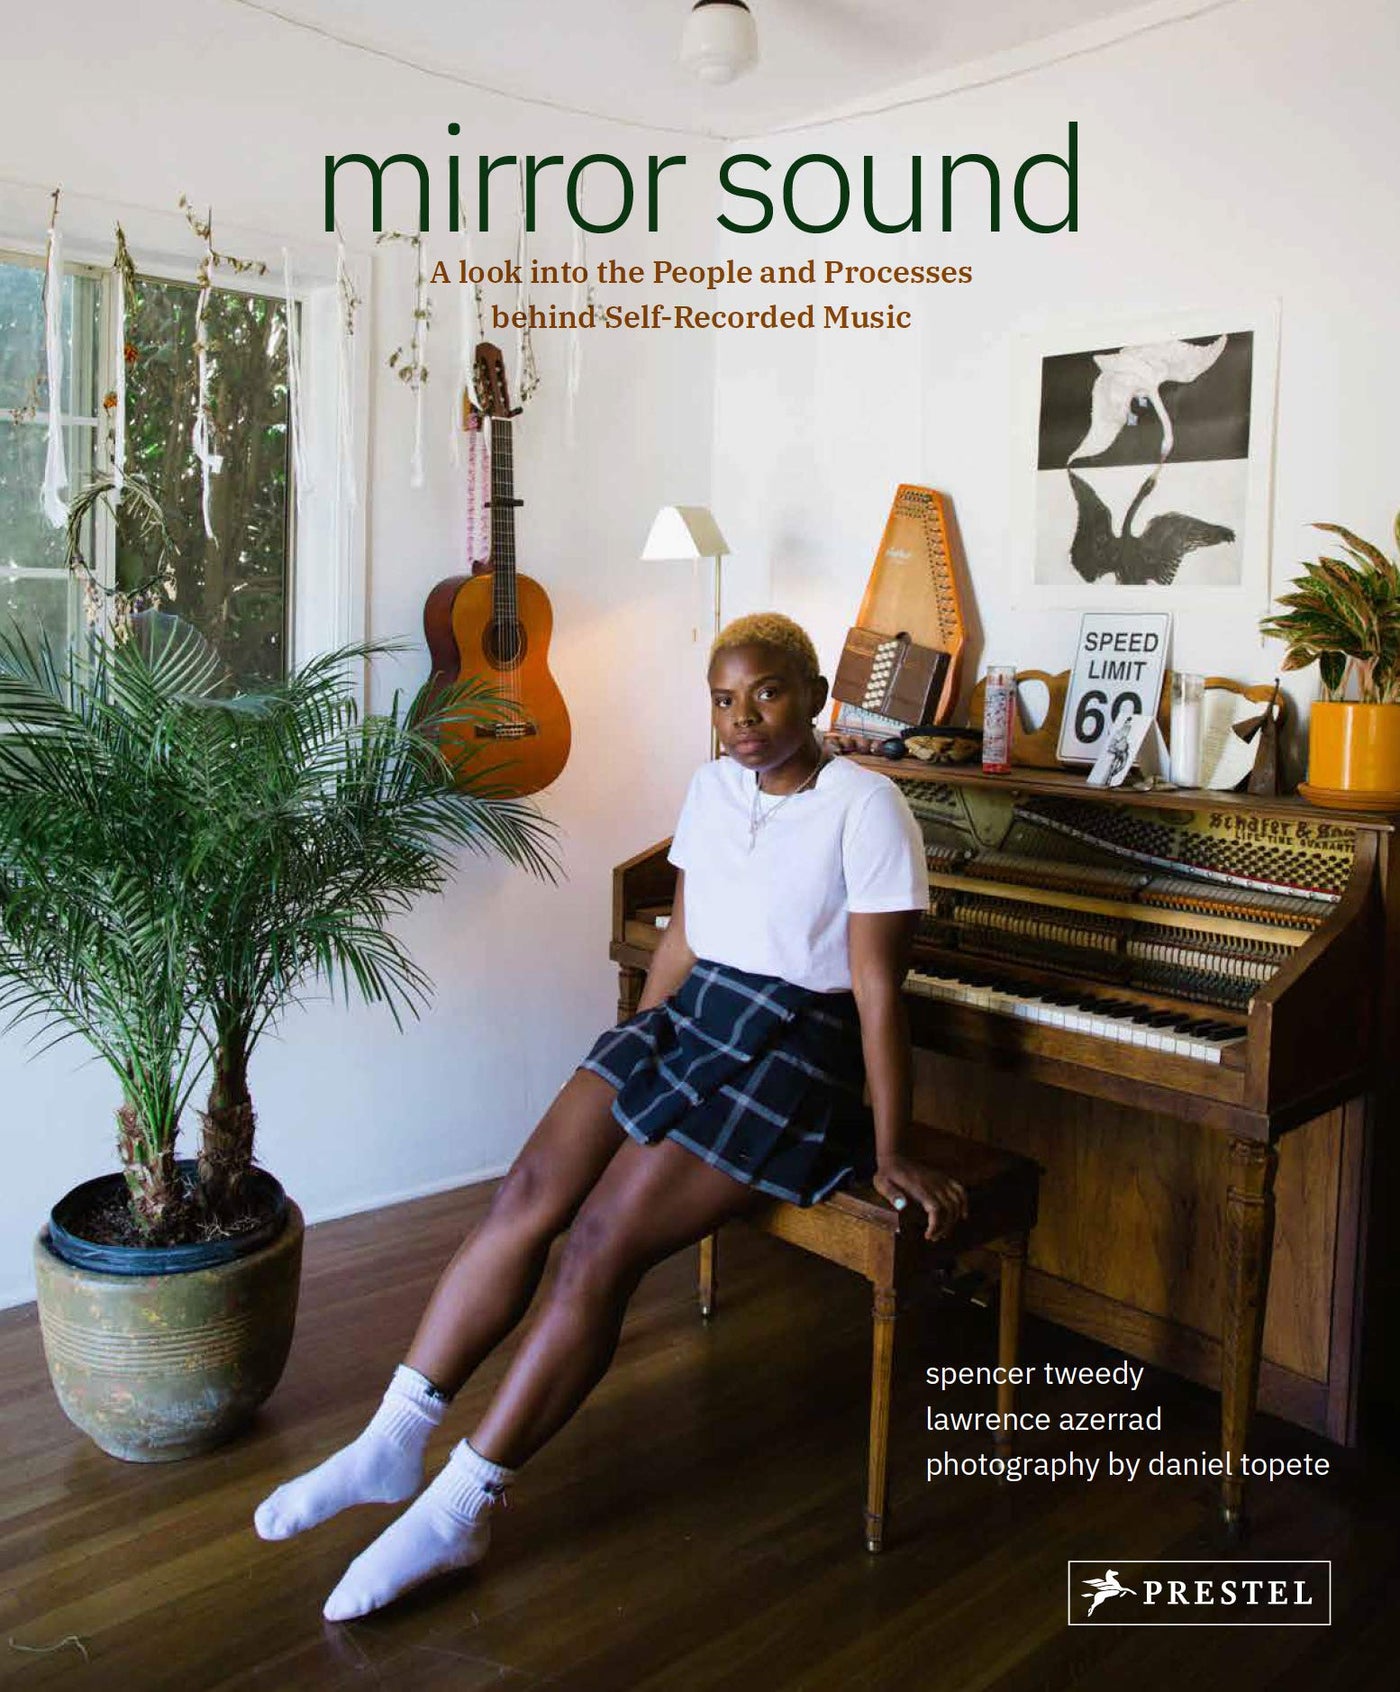 Mirror Sound: A Look Into the People and Processes Behind Self-Recorded Music by Spencer Tweedy